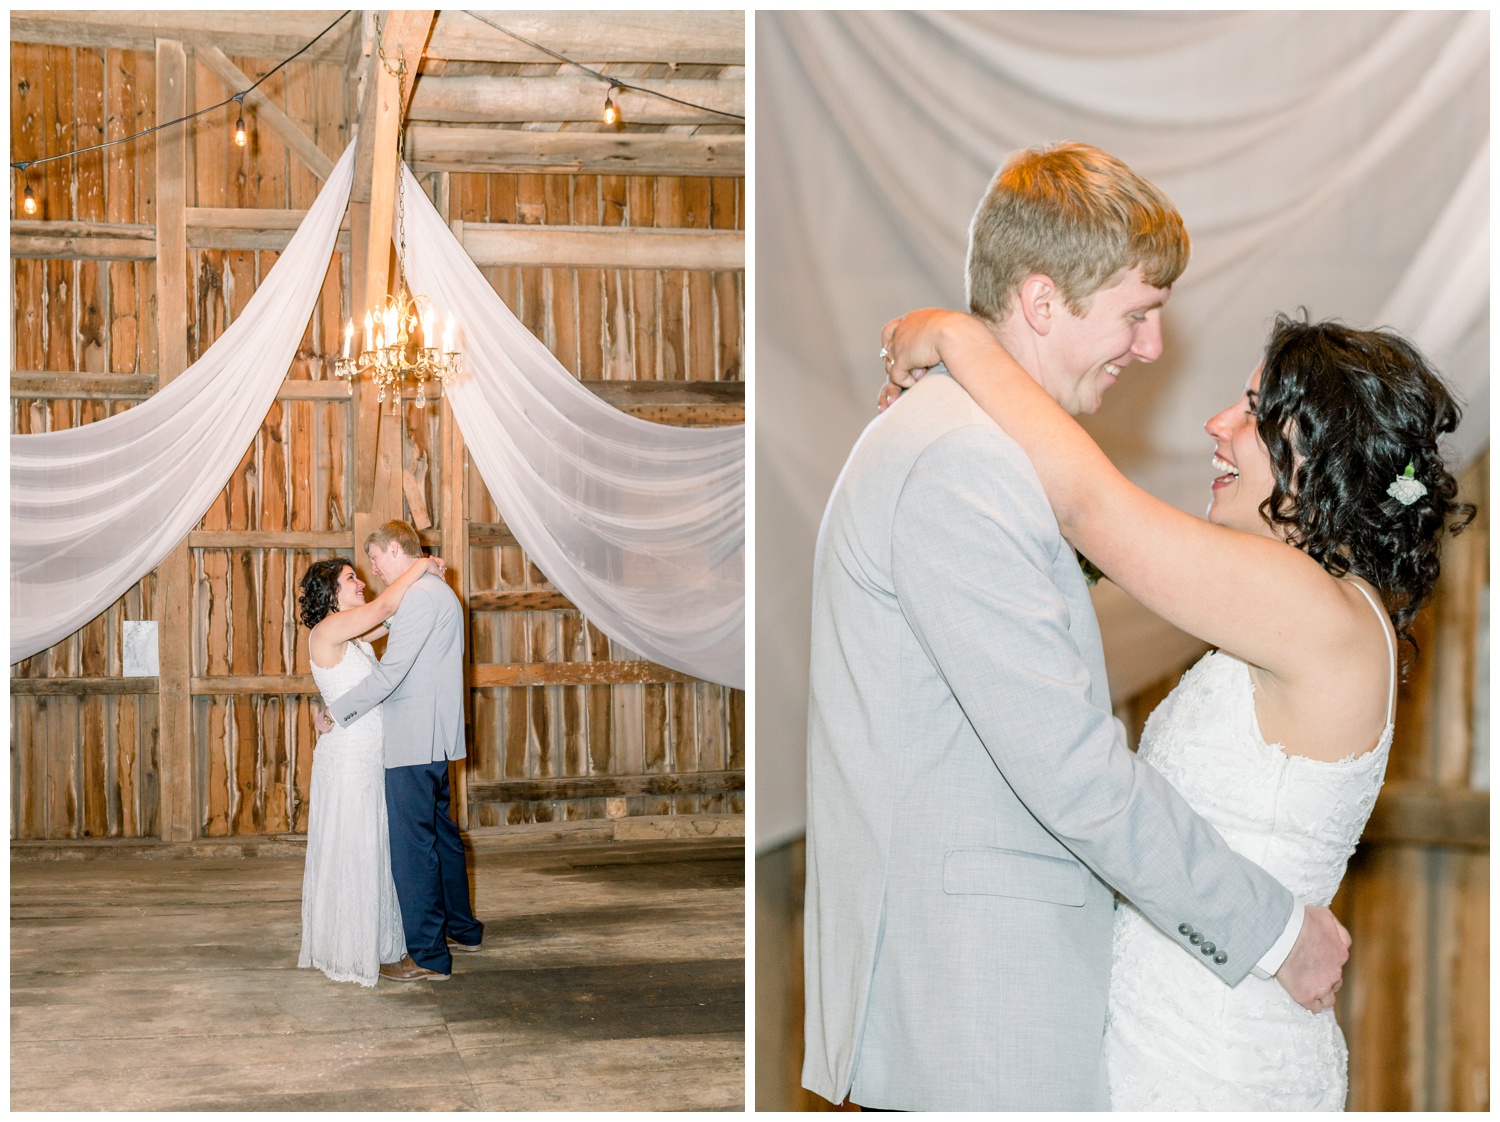 First Dance at Micro Wedding in Family Barn